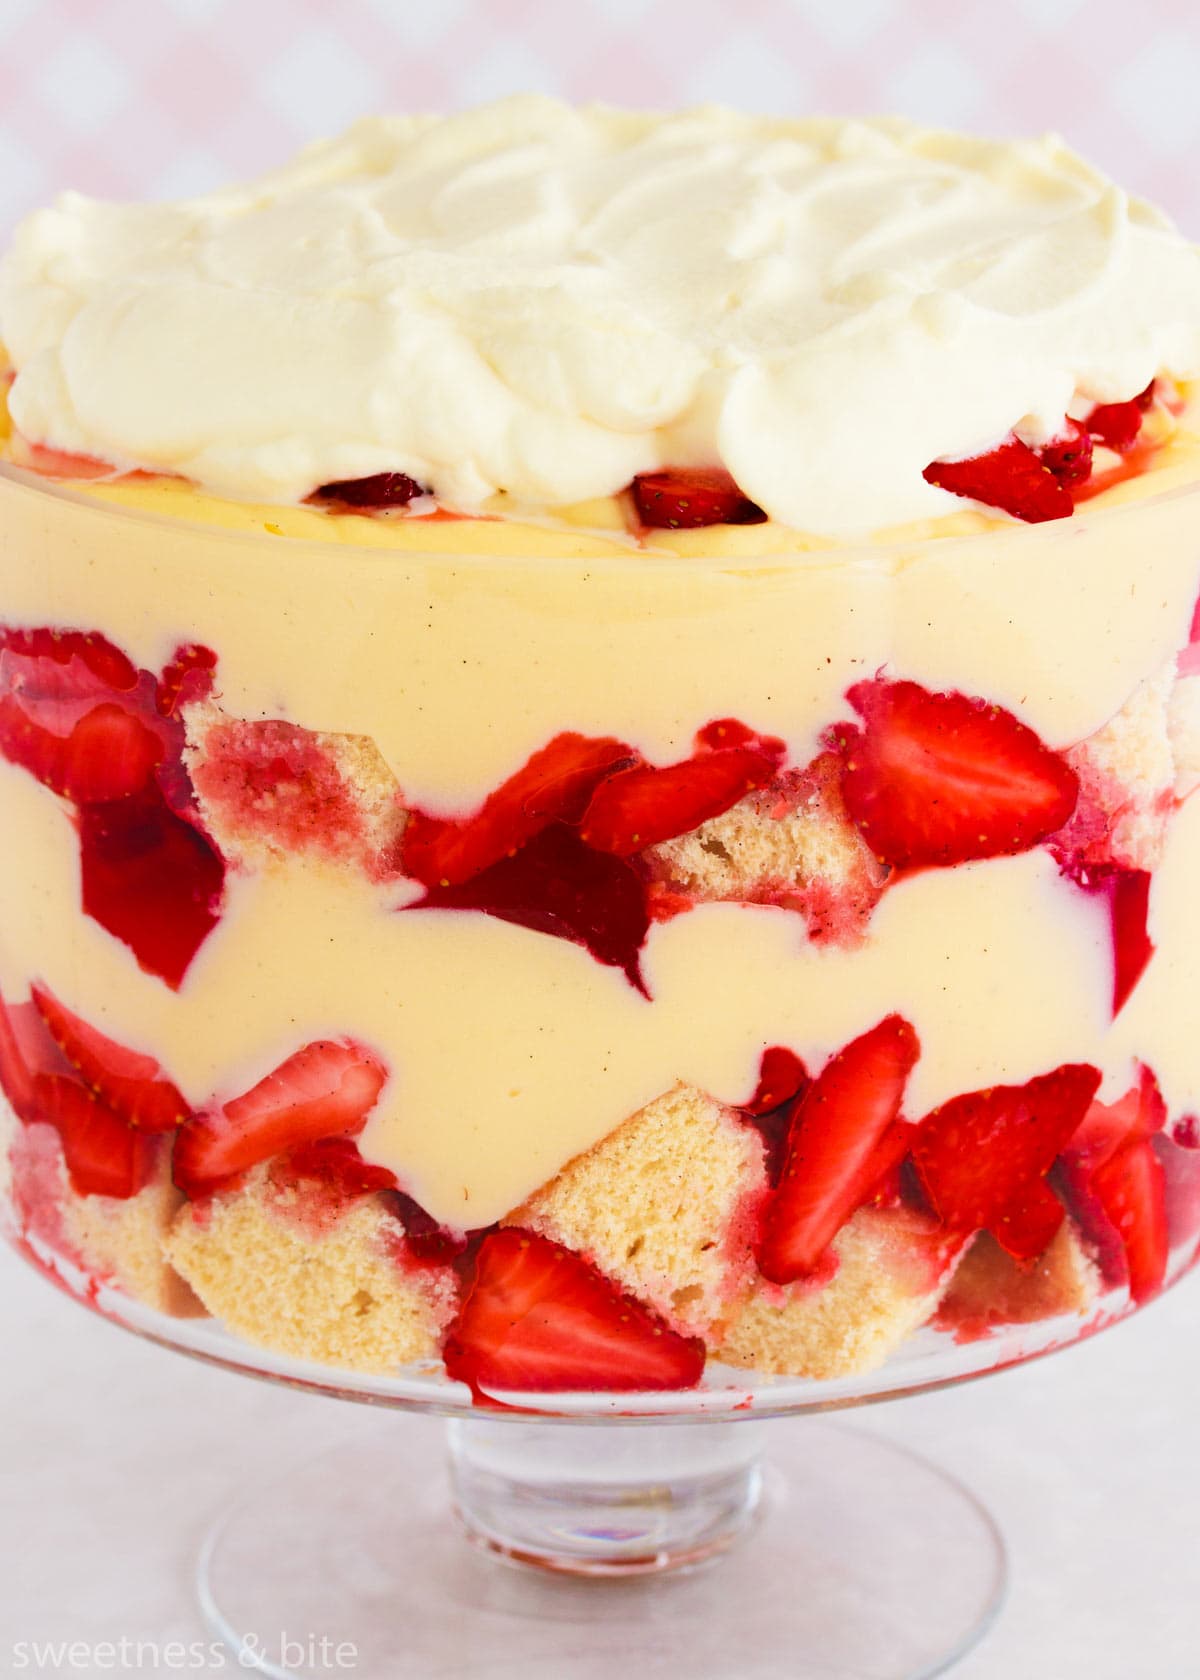 Close up of the layers in the gluten free trifle - sponge cake, strawberries, pink jelly, custard and whipped cream.